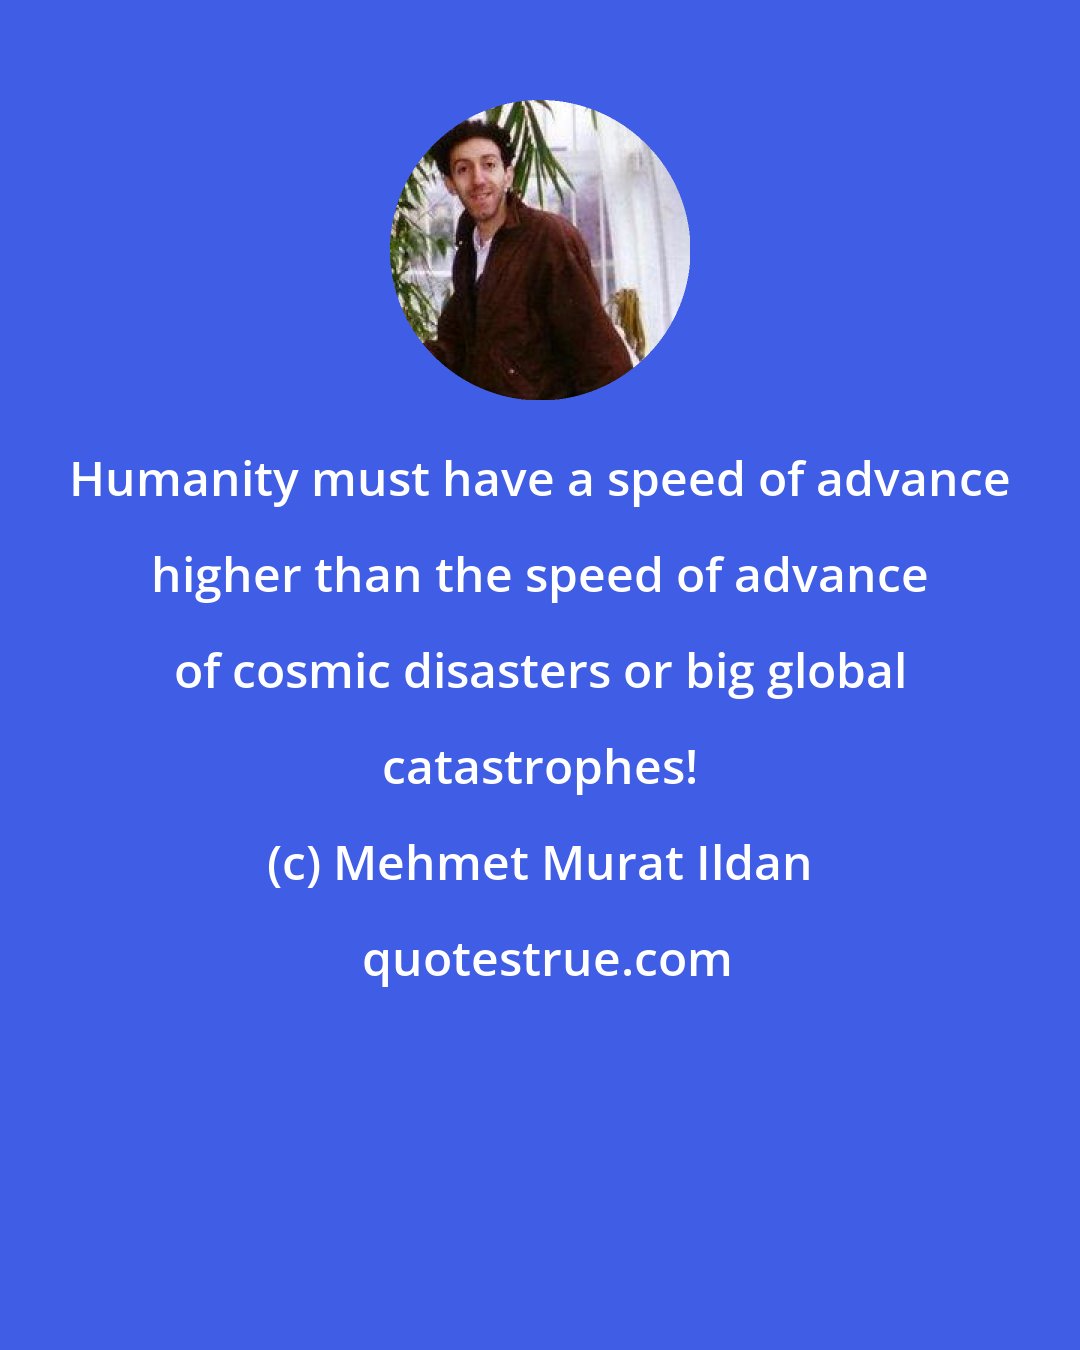 Mehmet Murat Ildan: Humanity must have a speed of advance higher than the speed of advance of cosmic disasters or big global catastrophes!